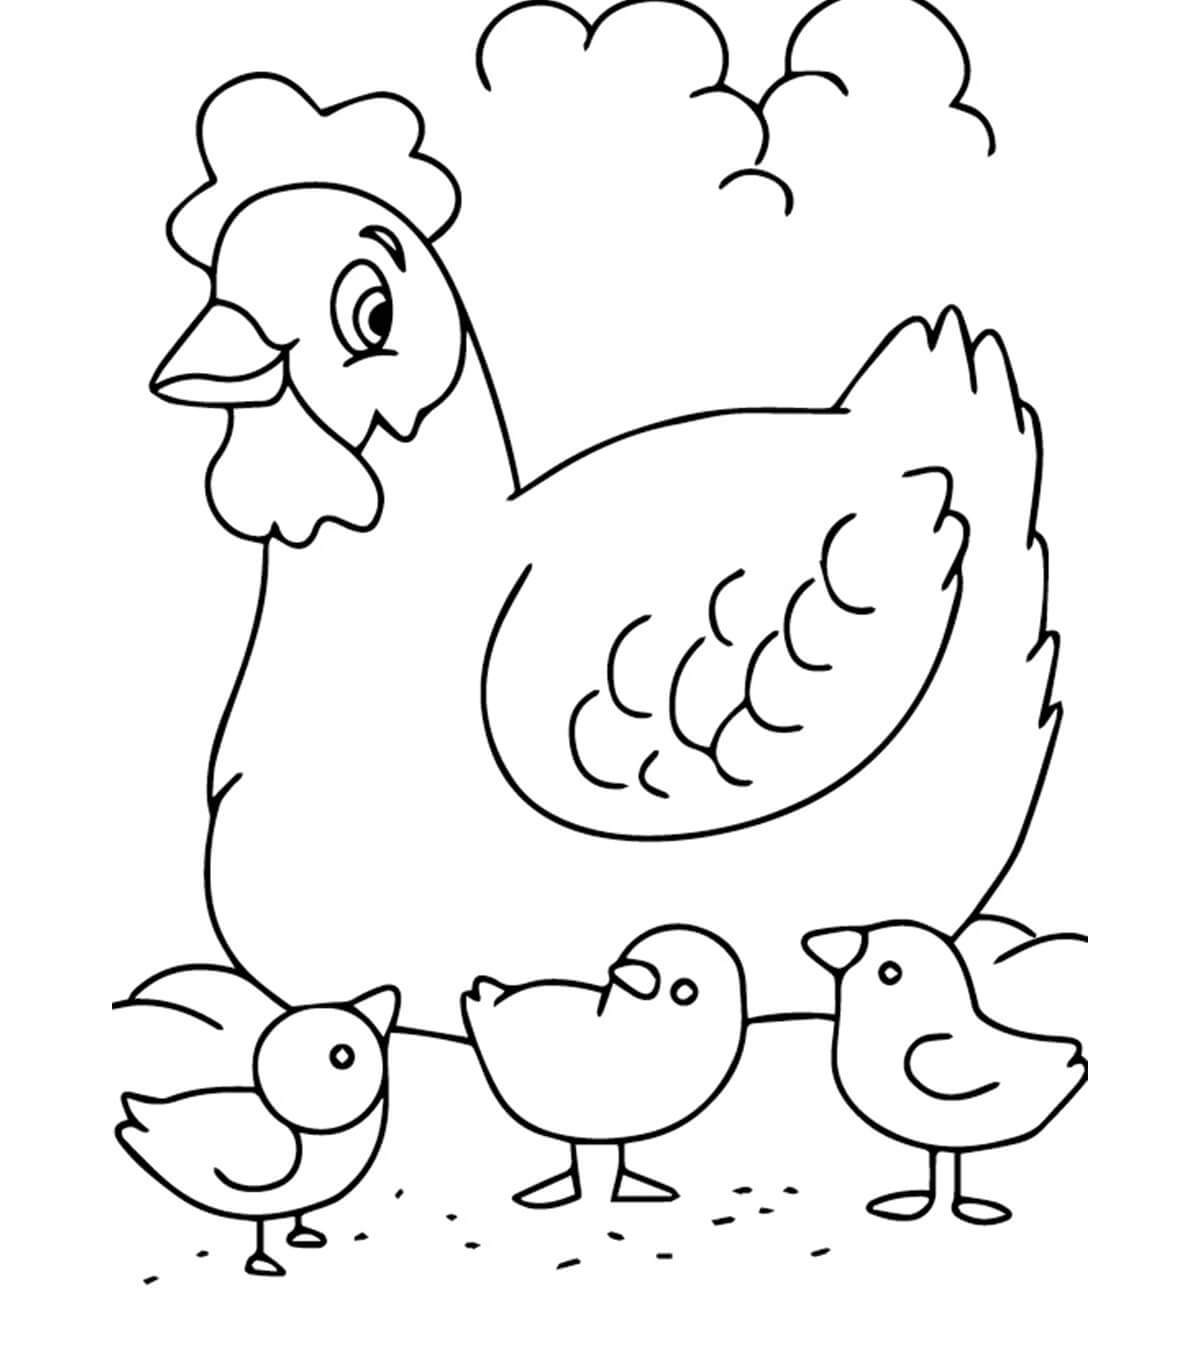 Chicken in a Farm Coloring Page